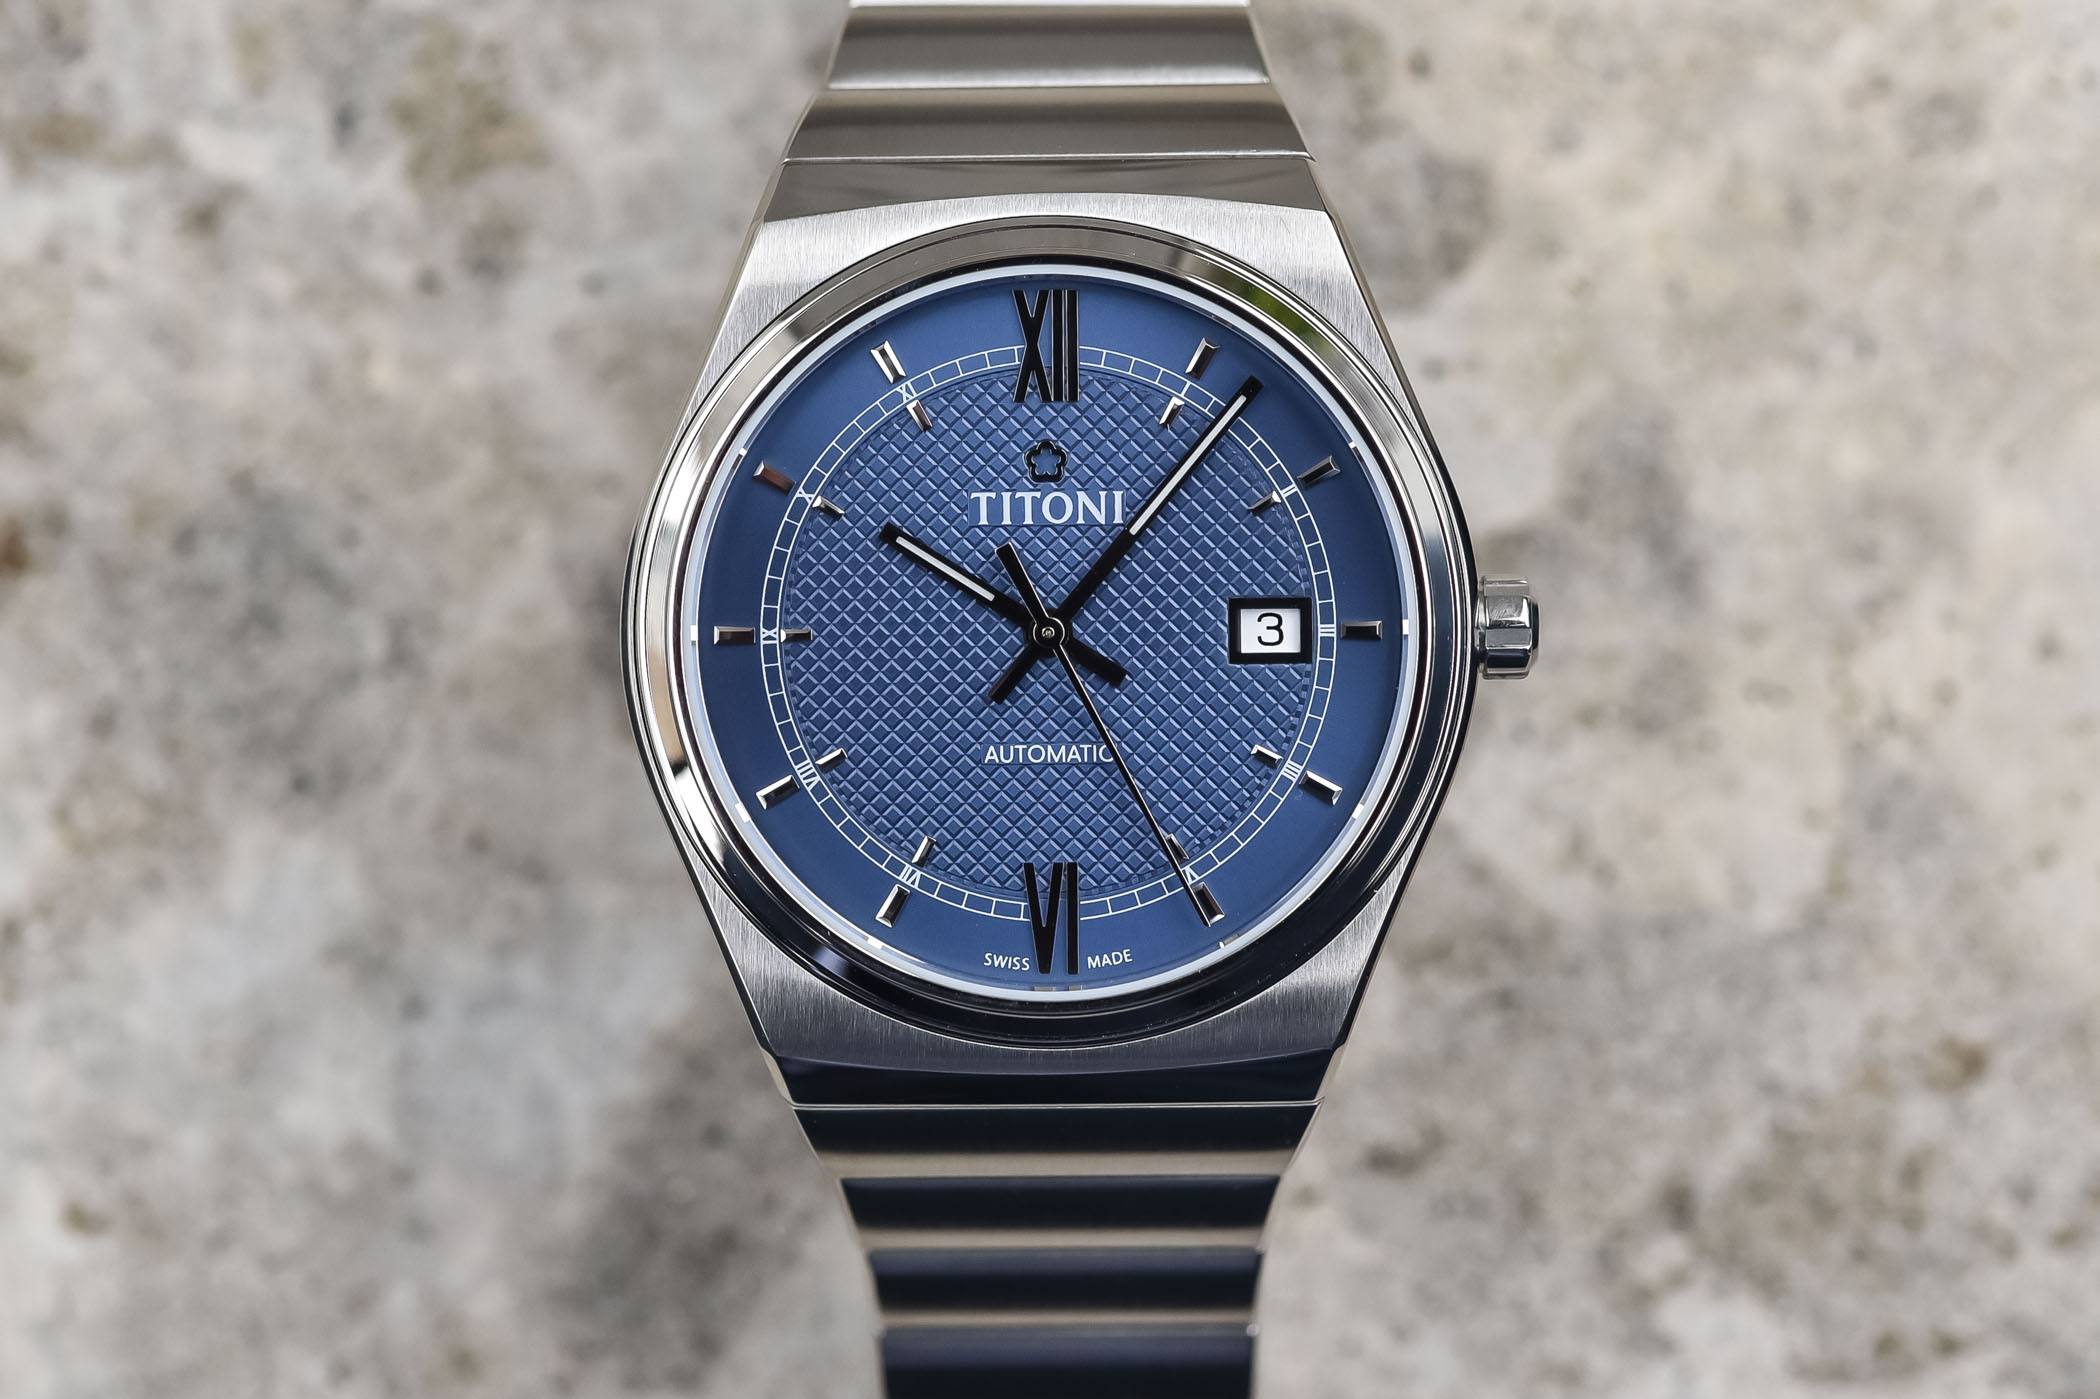 Titoni Impetus collection hands-on